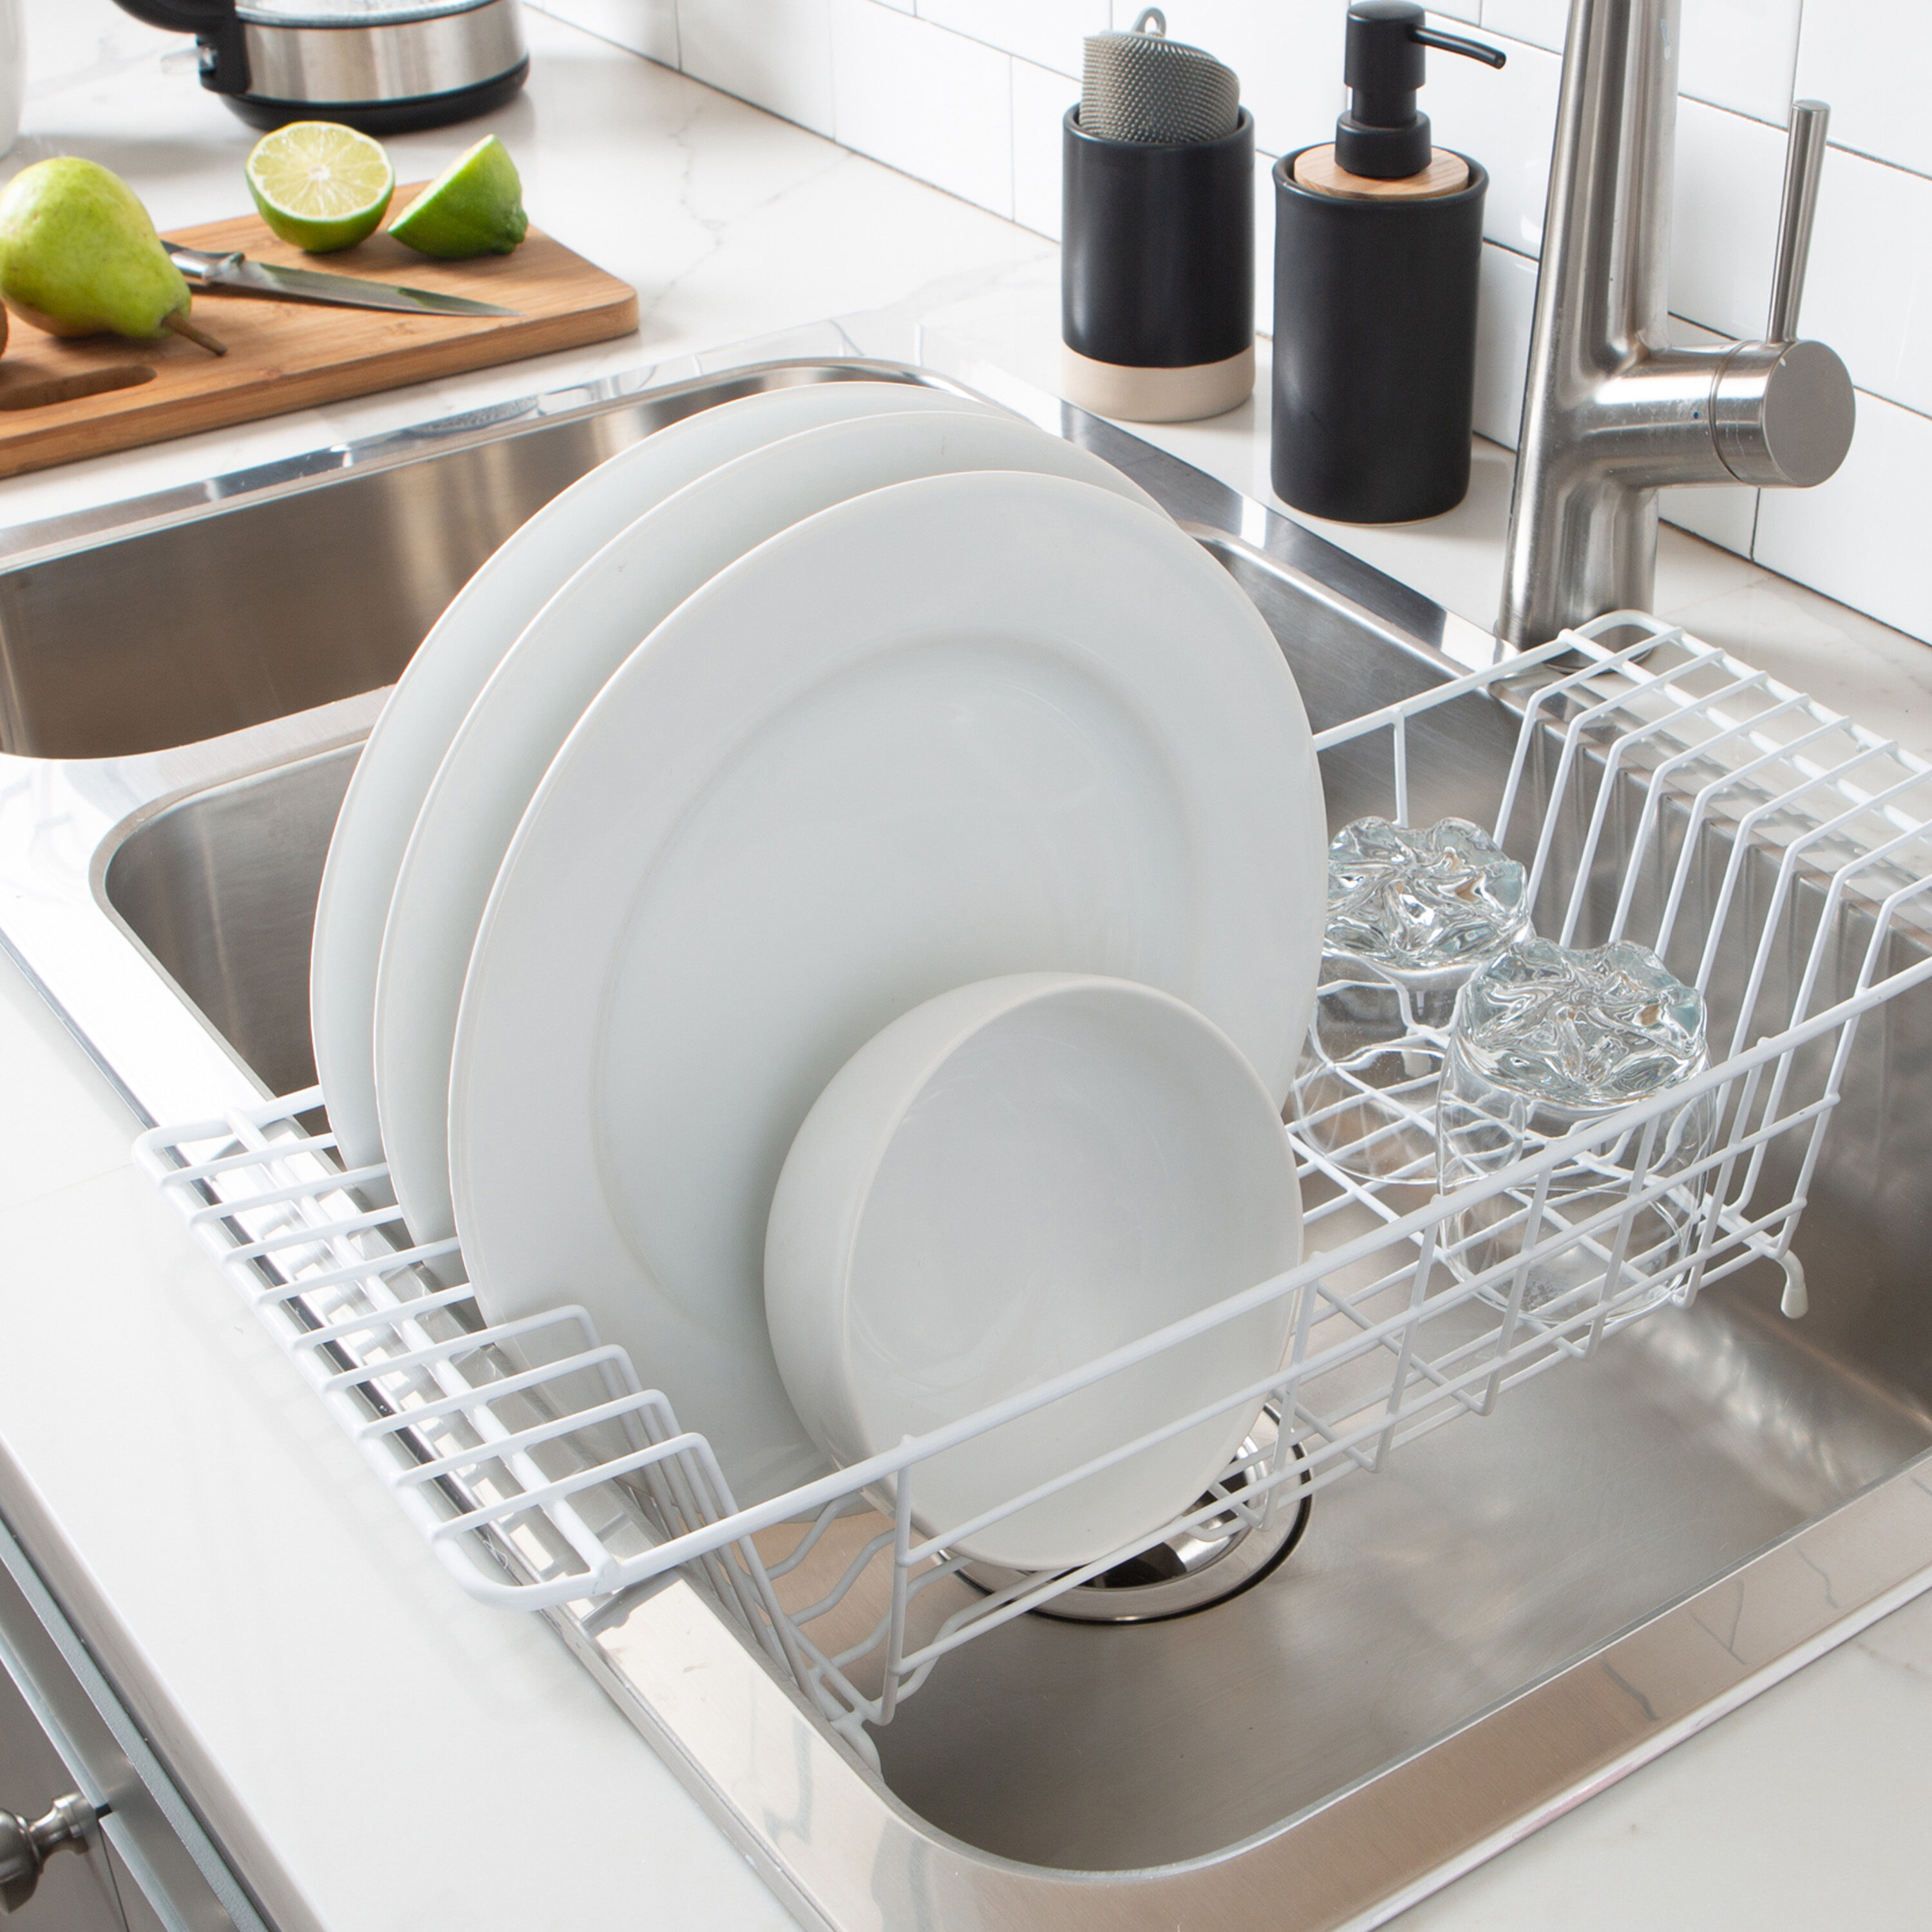 Kitchen Details 1.25-in W x 20-in L x 5-in H Metal Dish Rack in the Dish  Racks & Trays department at